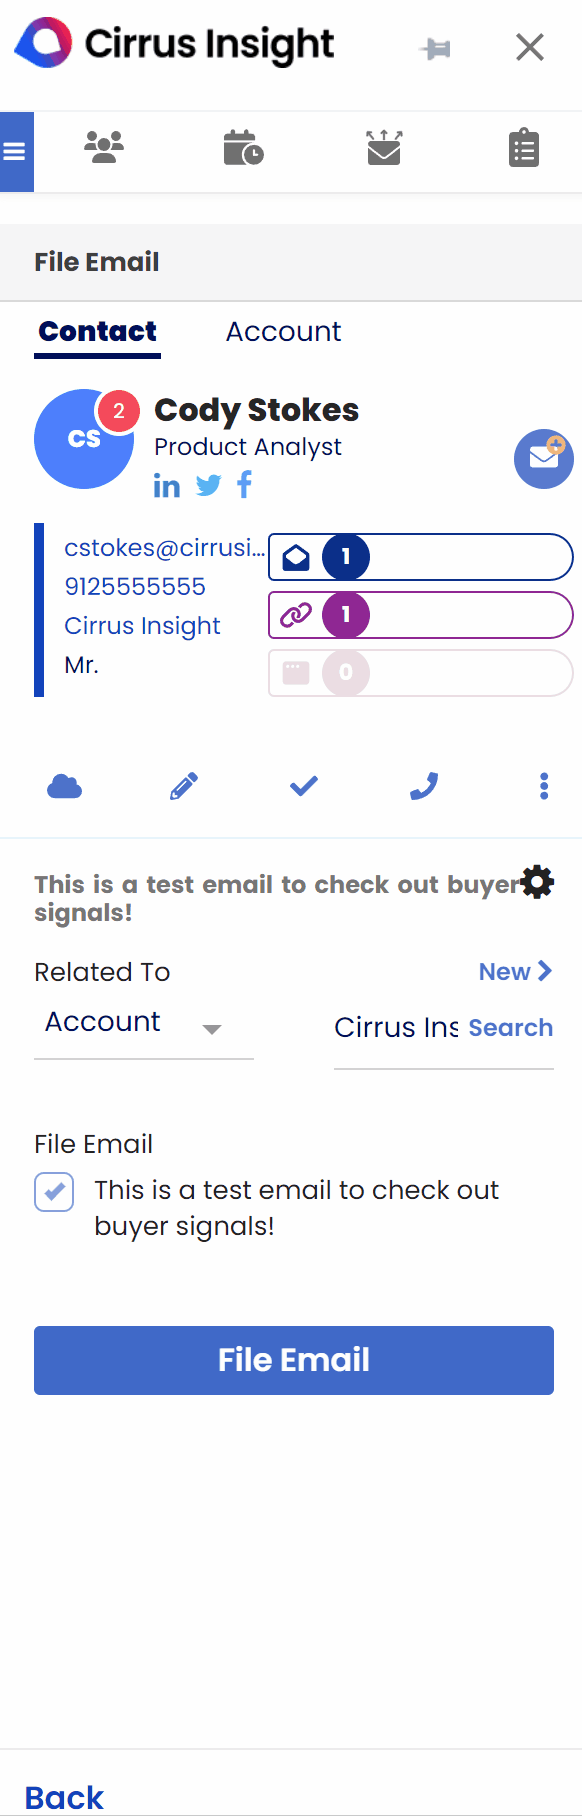 old-cirrus-insight-sidebar-file-email